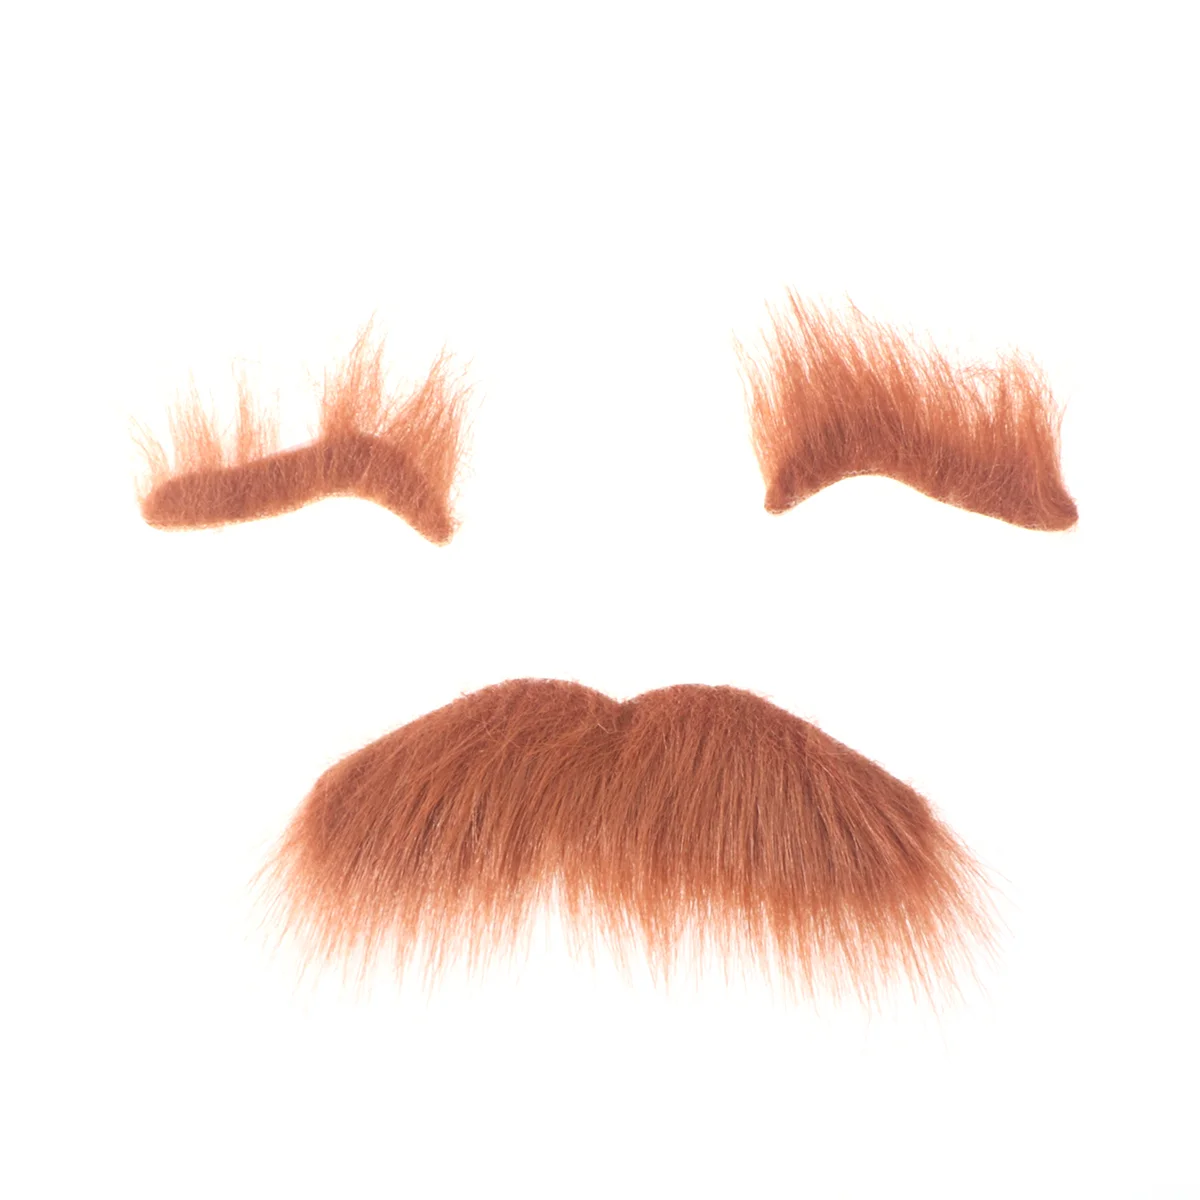 

Novelty Halloween Costumes Self Adhesive Fake Eyebrows Beard Moustache Kit Facial Hair Cosplay Props Disguise Decoration